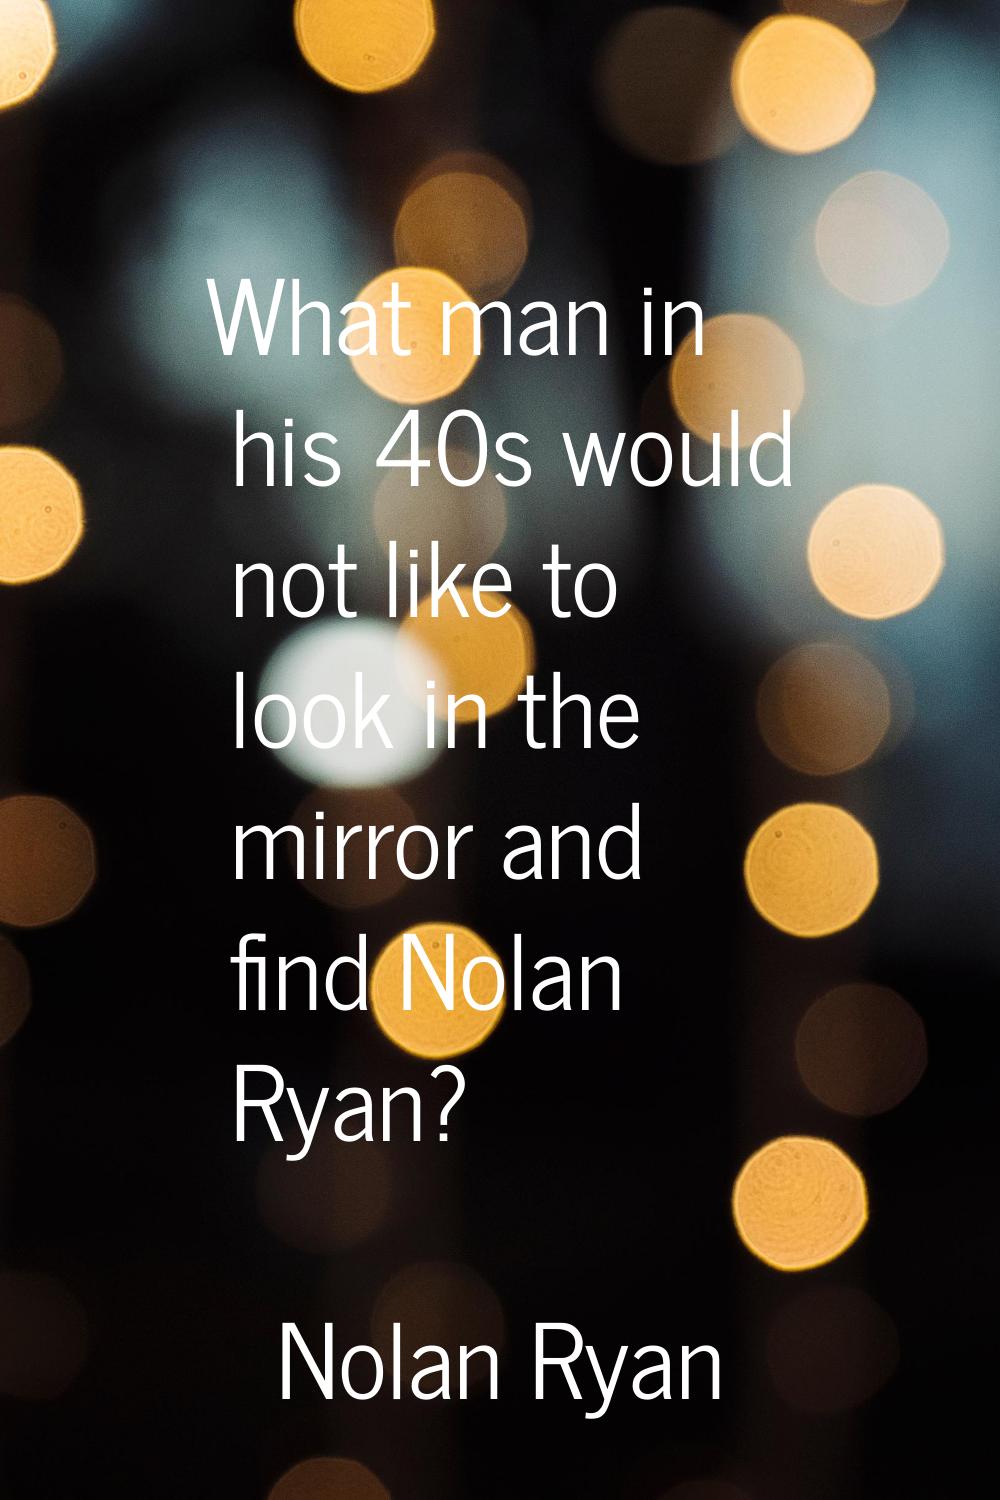 What man in his 40s would not like to look in the mirror and find Nolan Ryan?